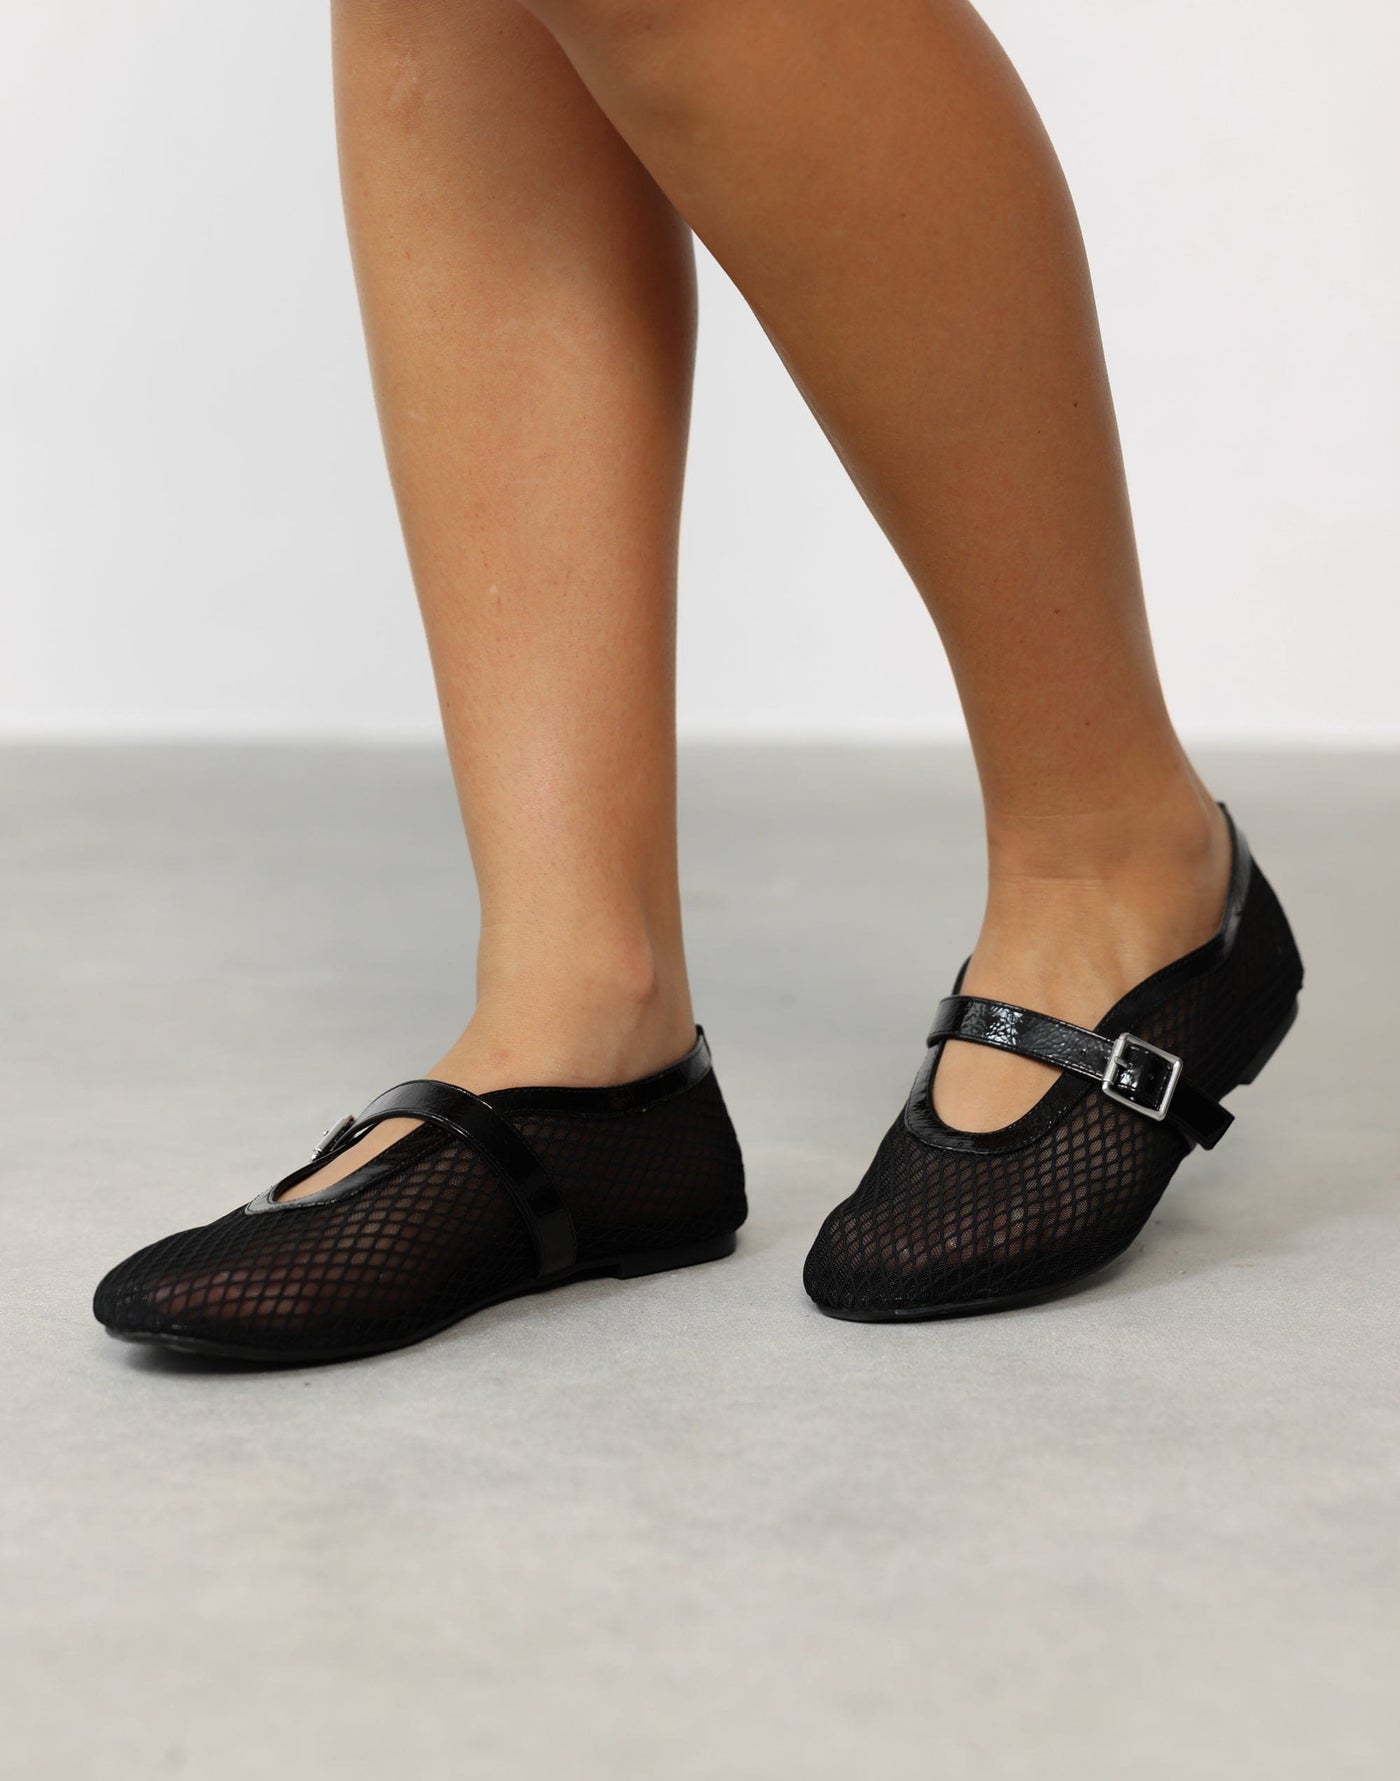 Addie Ballet Flat (Black Crinkle Print) - By Therapy - Mesh Strap Upper Ballet Flat - Women's Shoes - Charcoal Clothing